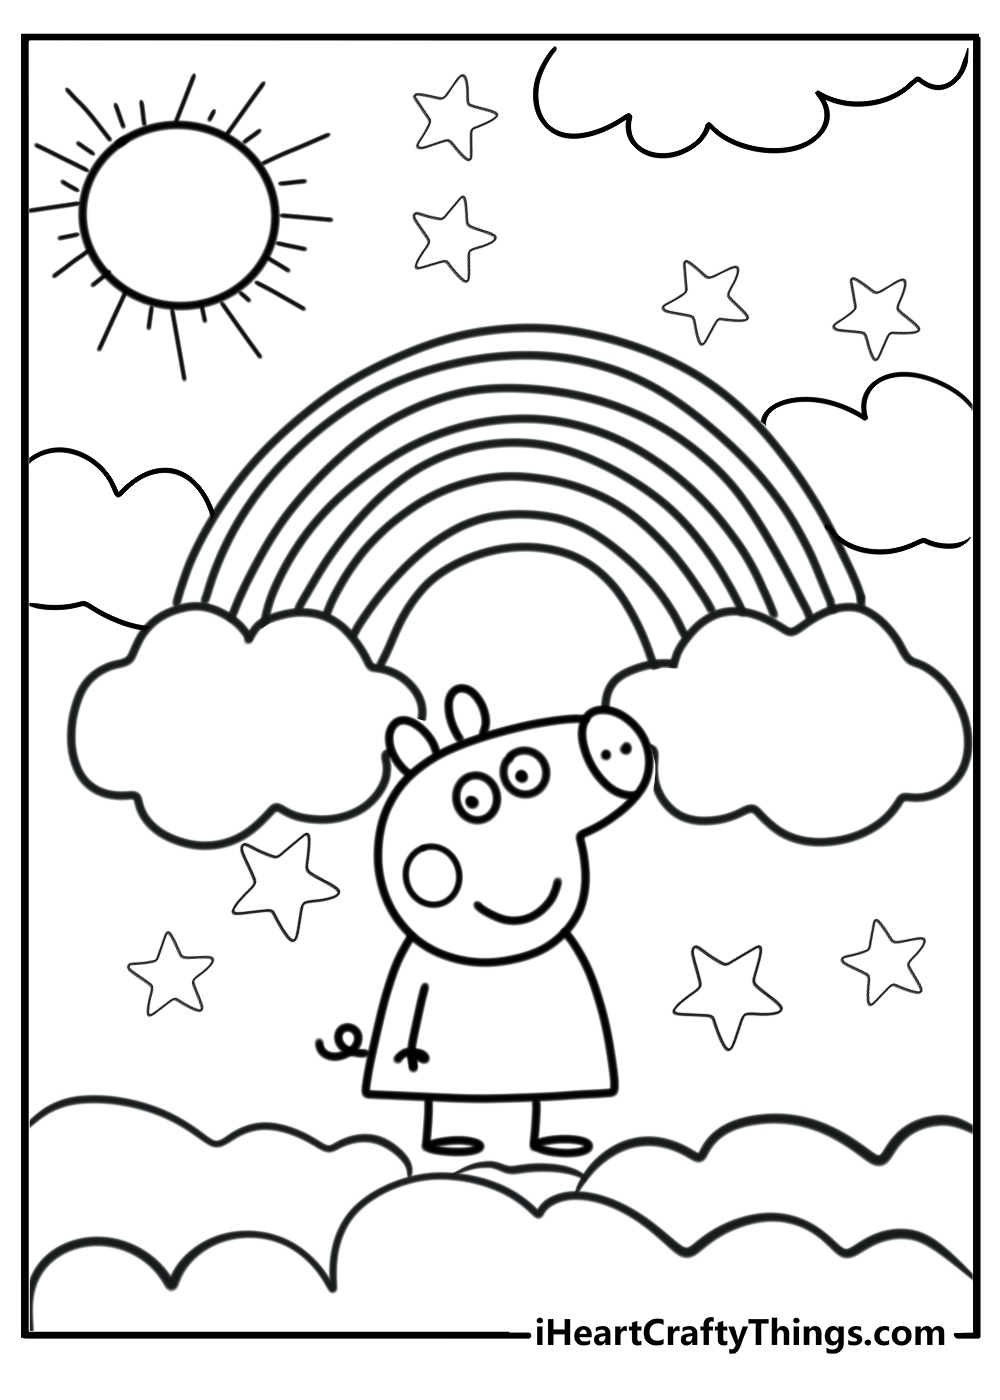 Coloring page of peppa pig themed rainbow